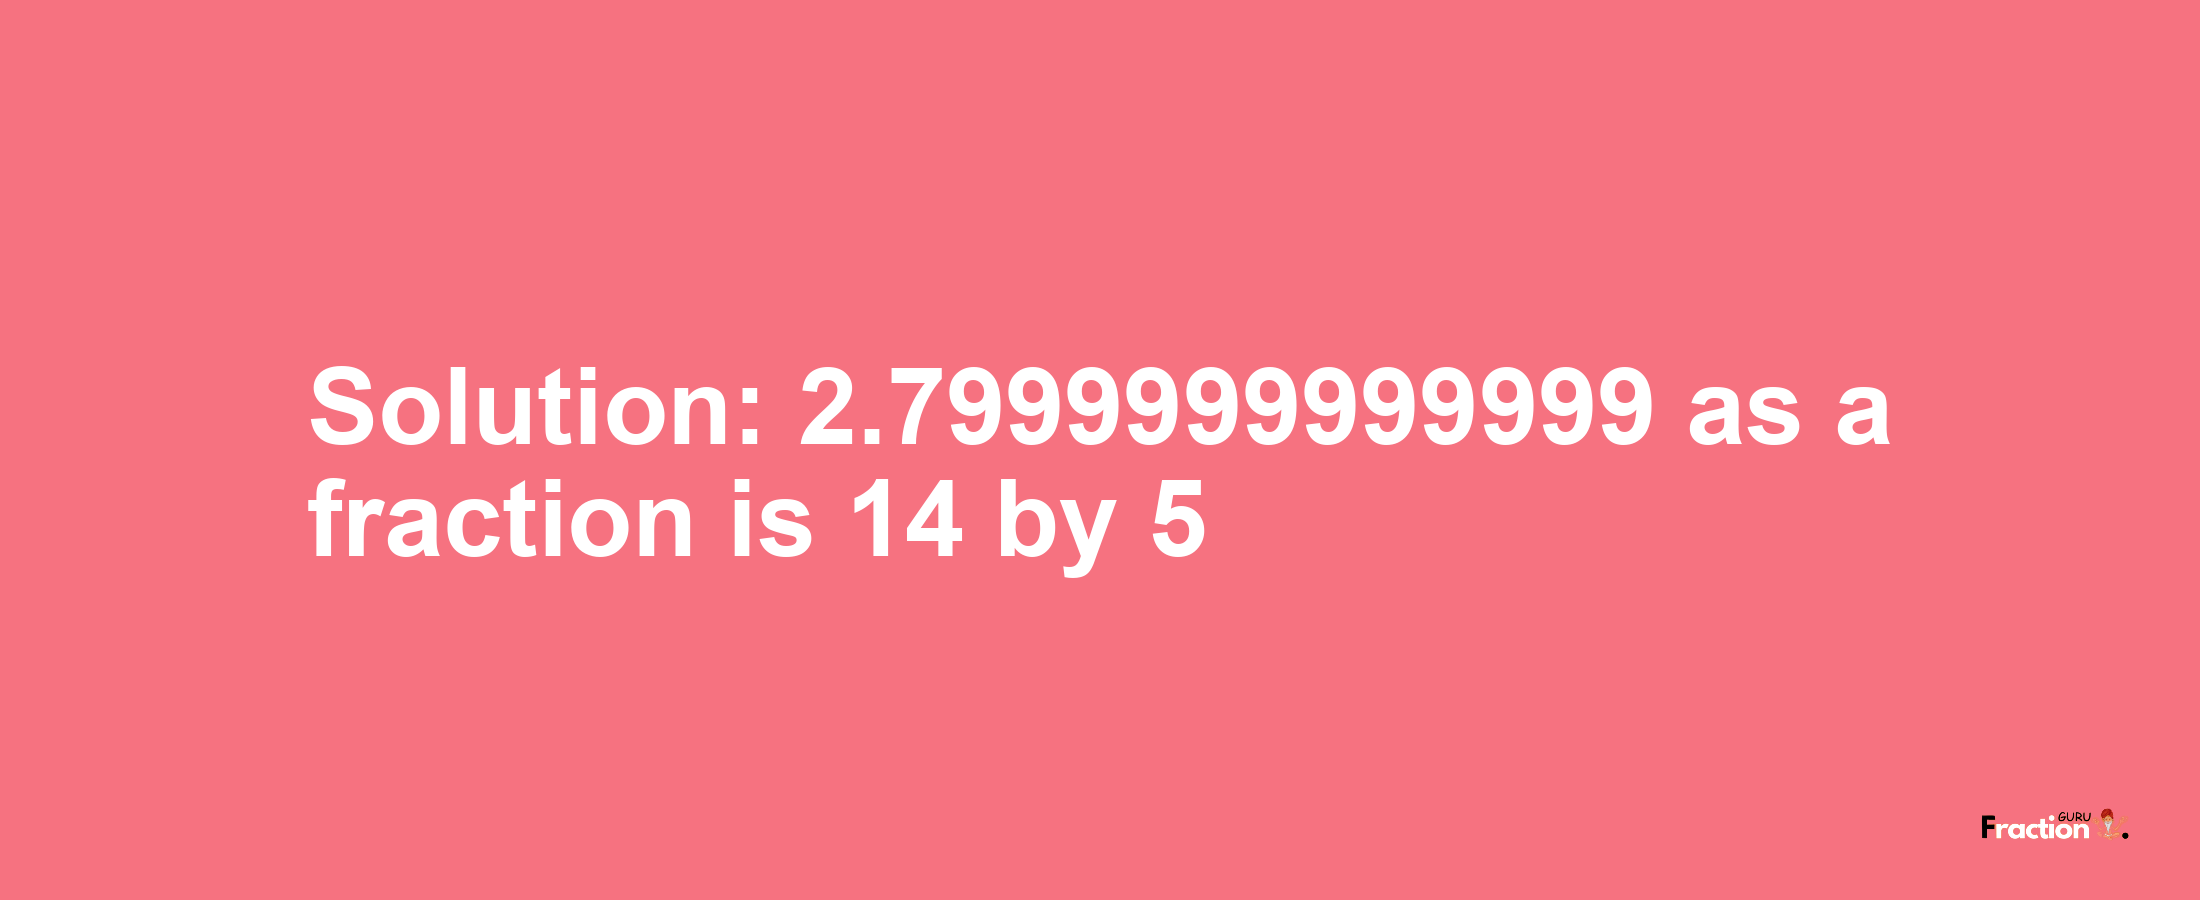 Solution:2.7999999999999 as a fraction is 14/5